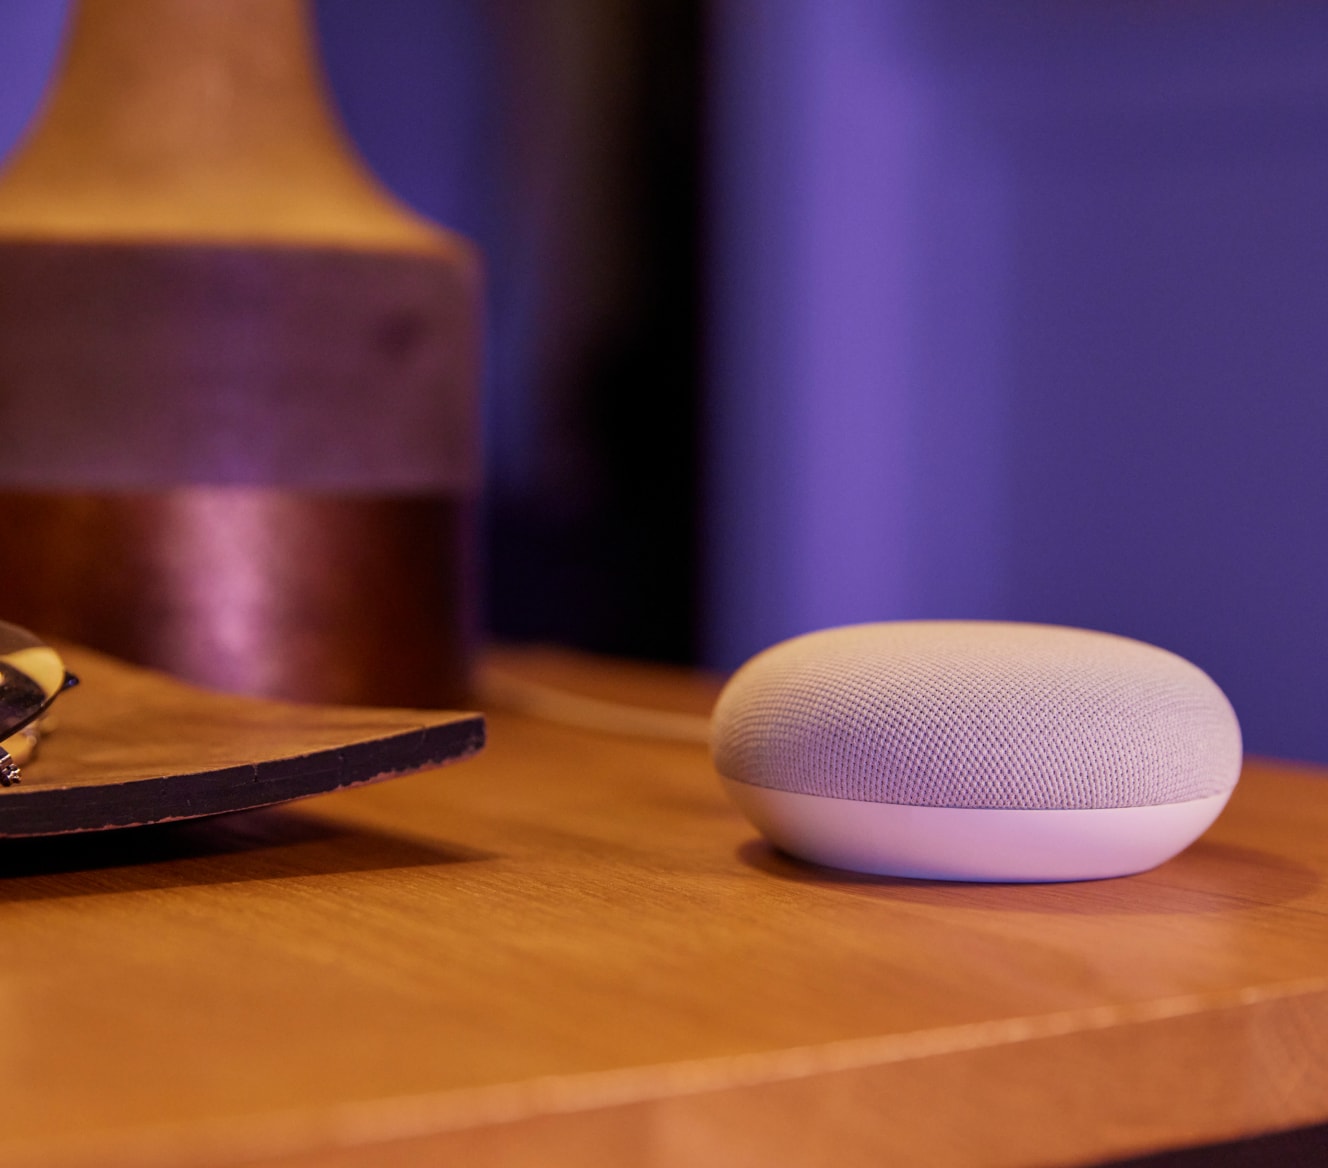 Google voice commands on a bedside table